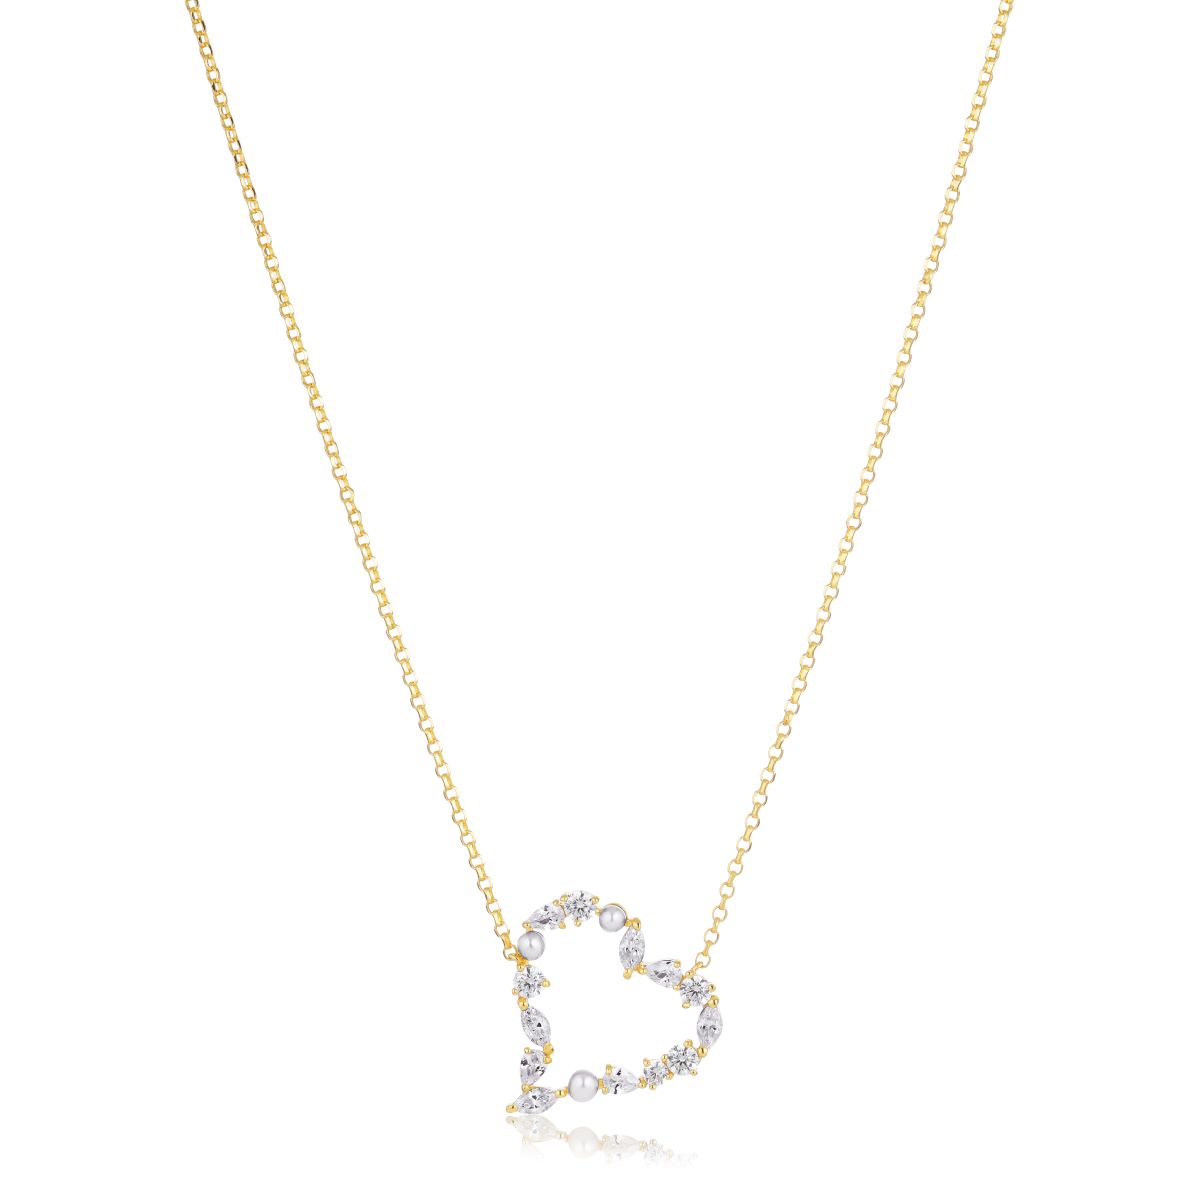 Sif Jakobs Adria Amore Necklace - Gold with Pearl and Zirconia